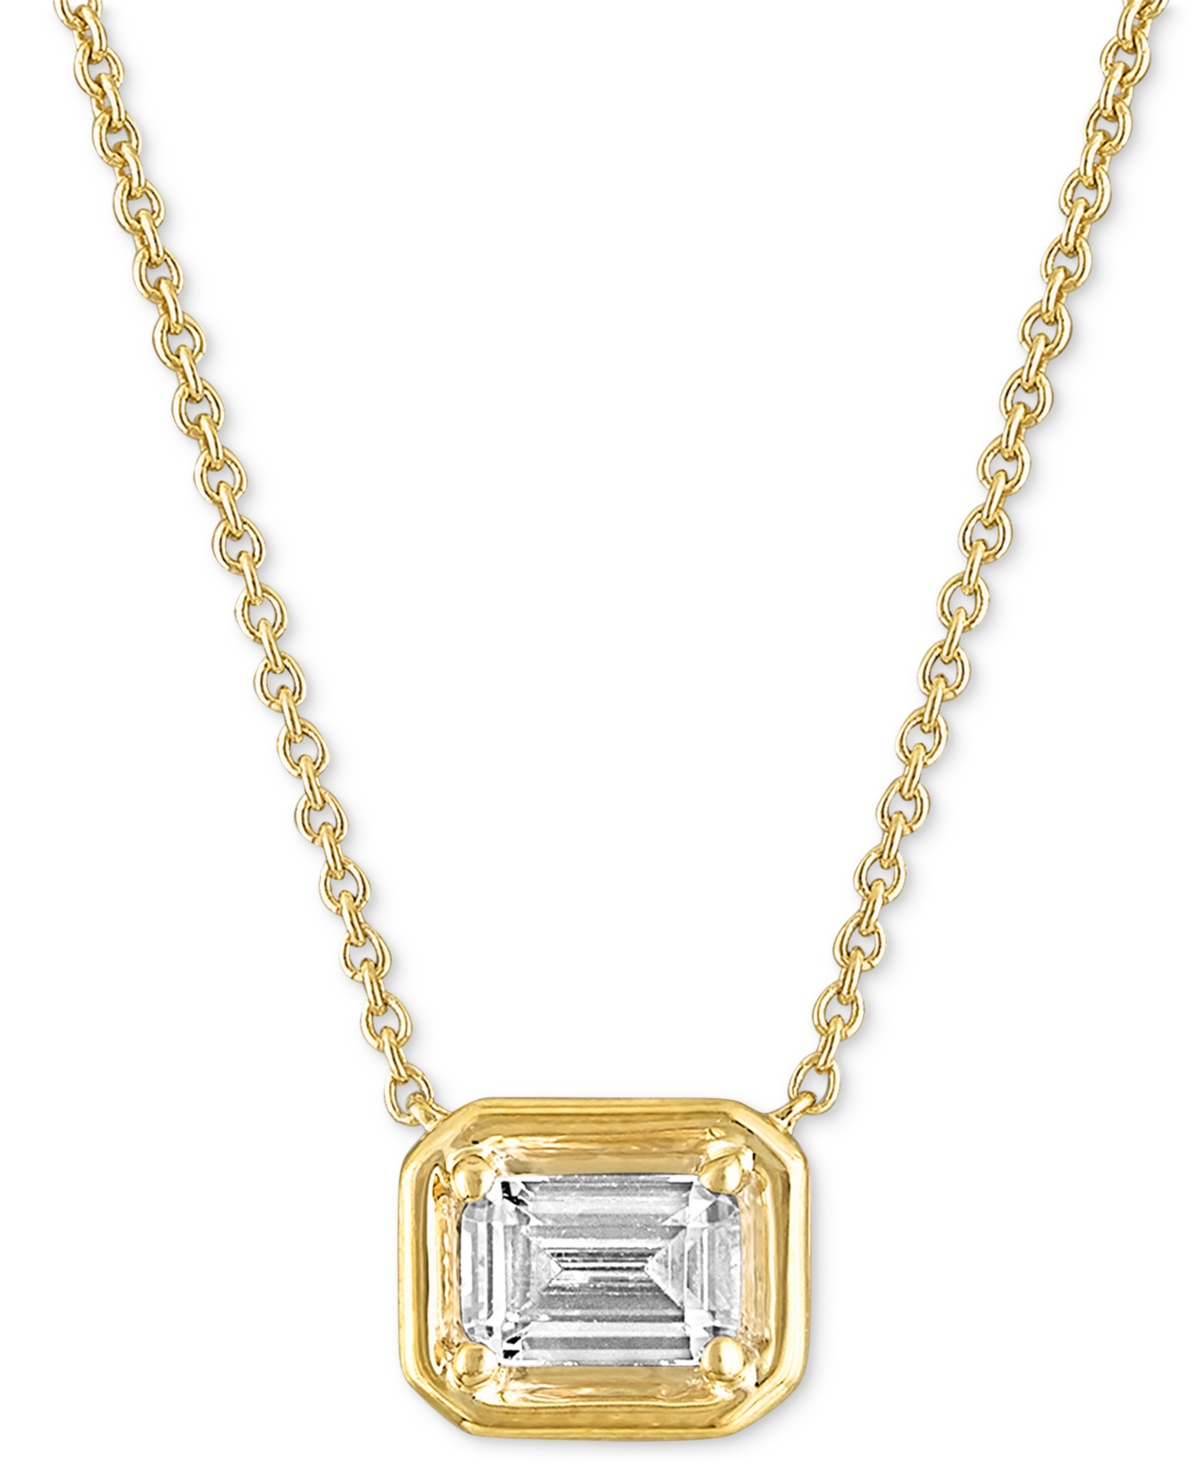 Certified Diamond Emerald-Cut Solitaire 18" Pendant Necklace (1/2 ct. t.w.) in 14k Gold Featuring Diamonds from the Beers Code of Origin, Crea